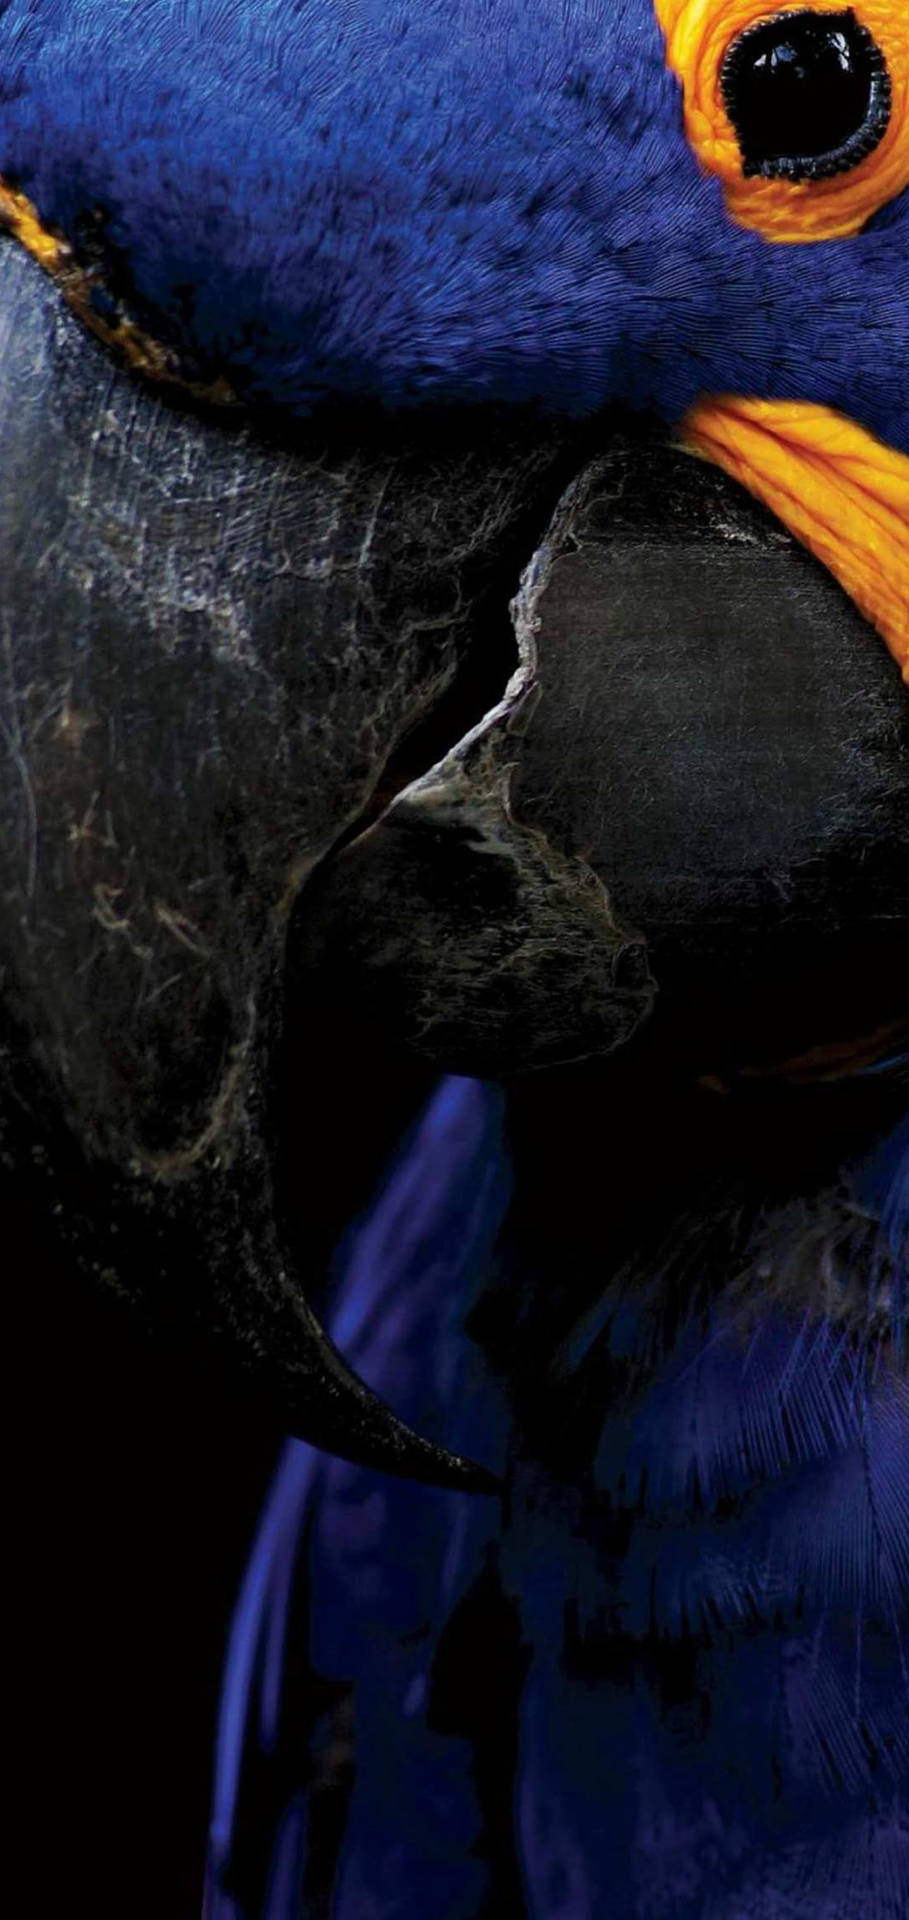 Samsung S10 Display - Captivating Image Of A Hyacinth Macaw